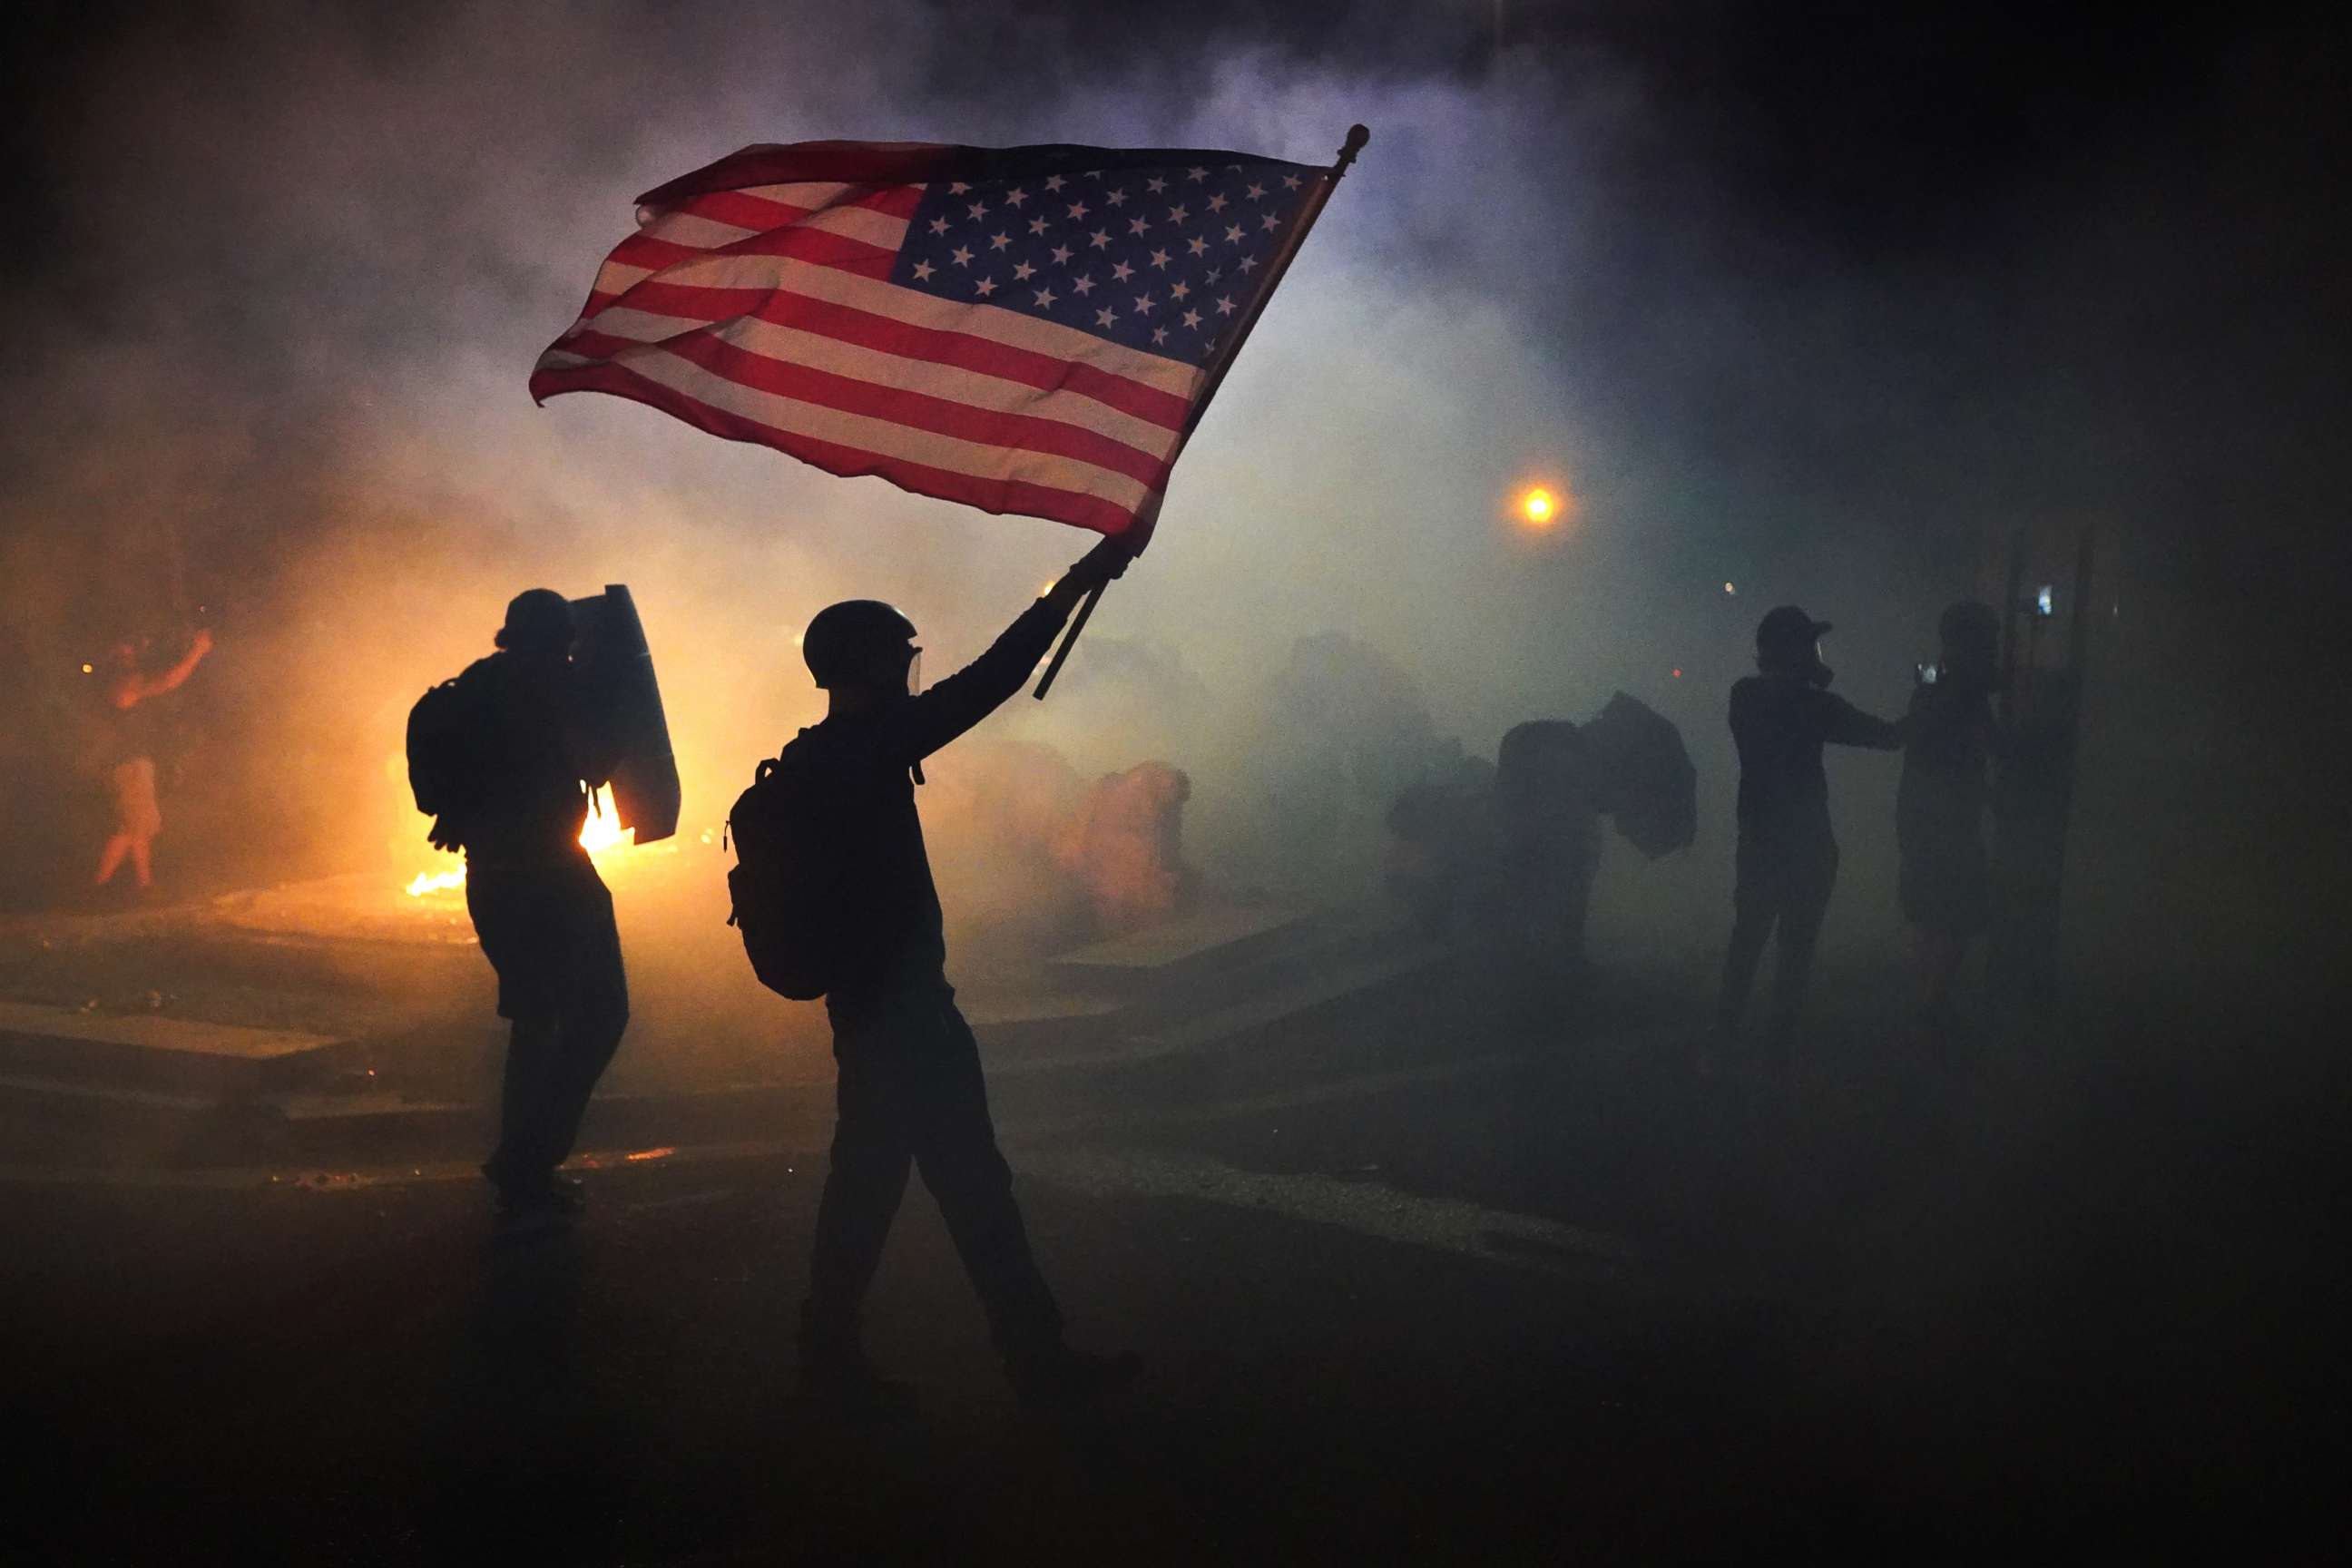 PHOTO: A protester flies an American flag while walking through tear gas fired by federal officers during a protest in front of the Mark O. Hatfield U.S. Courthouse on July 21, 2020 in Portland, Ore.